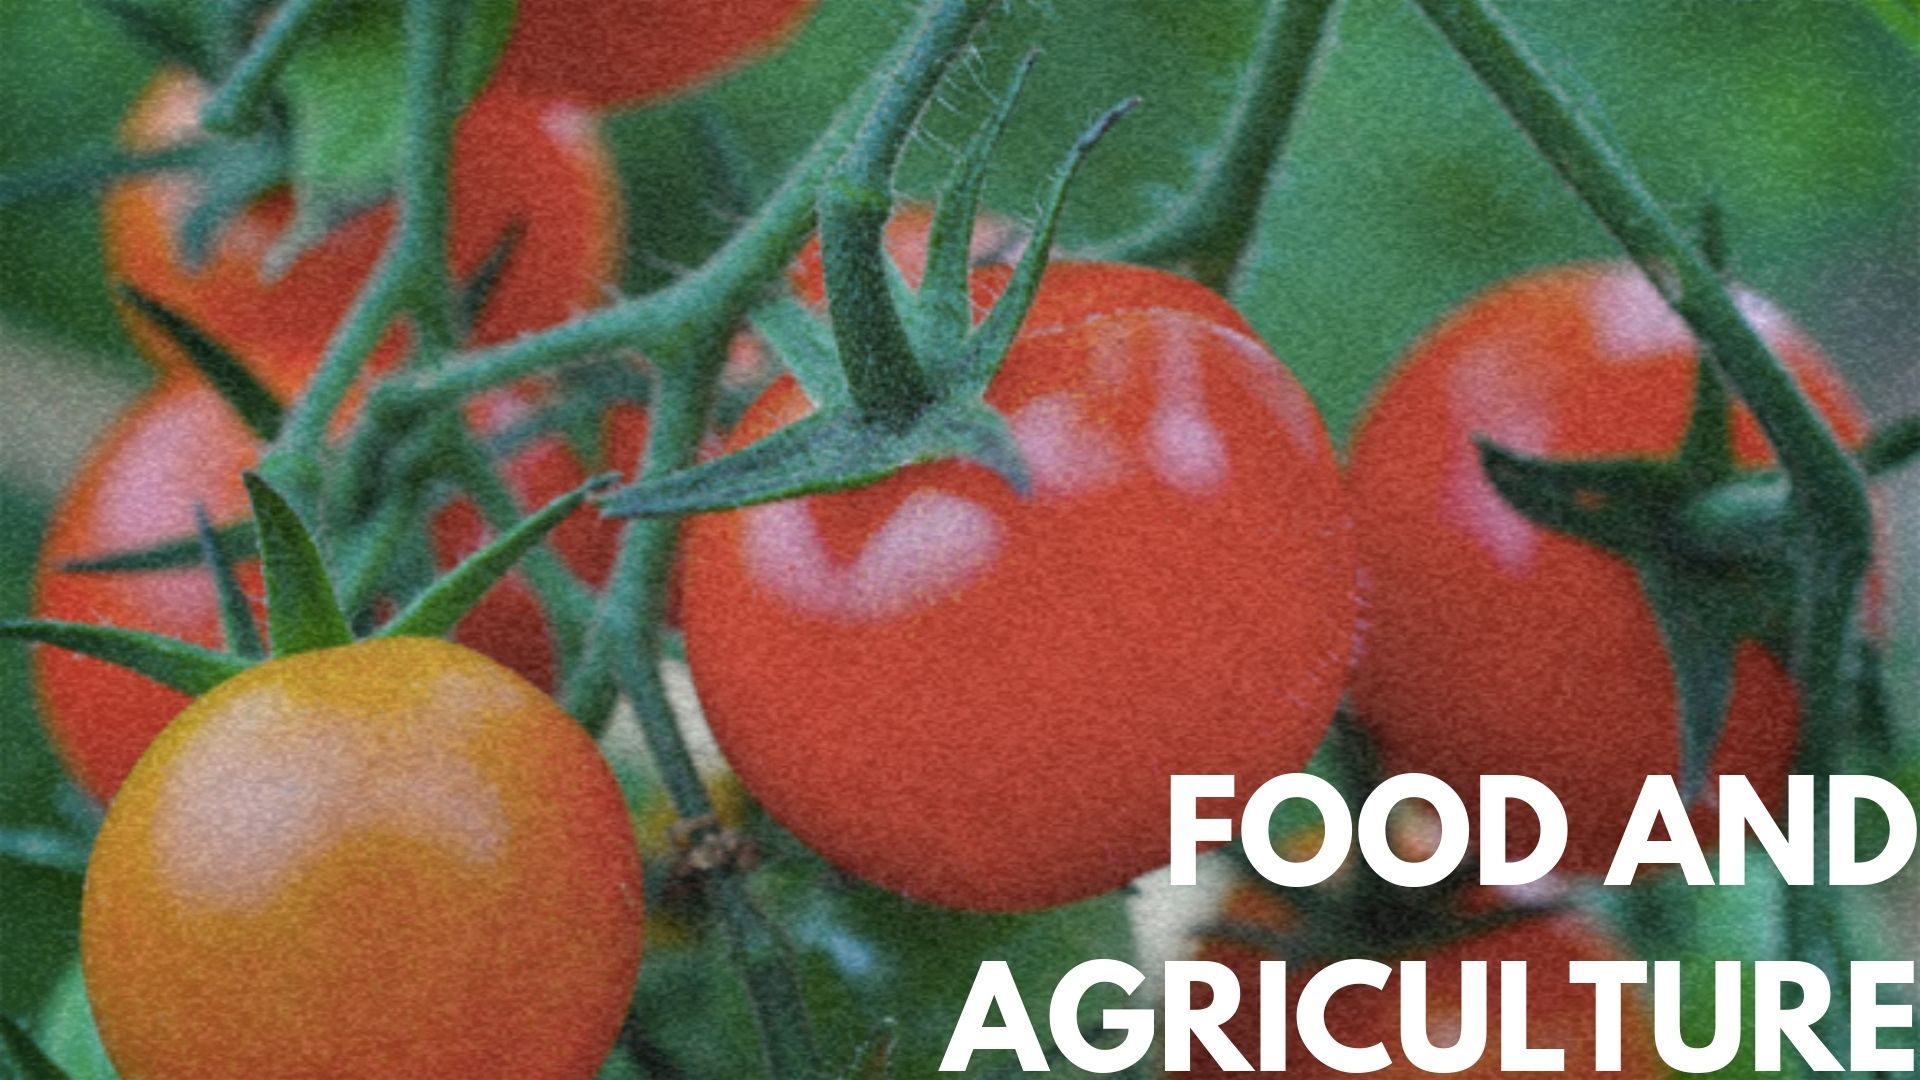 Food and agriculture header.jpg